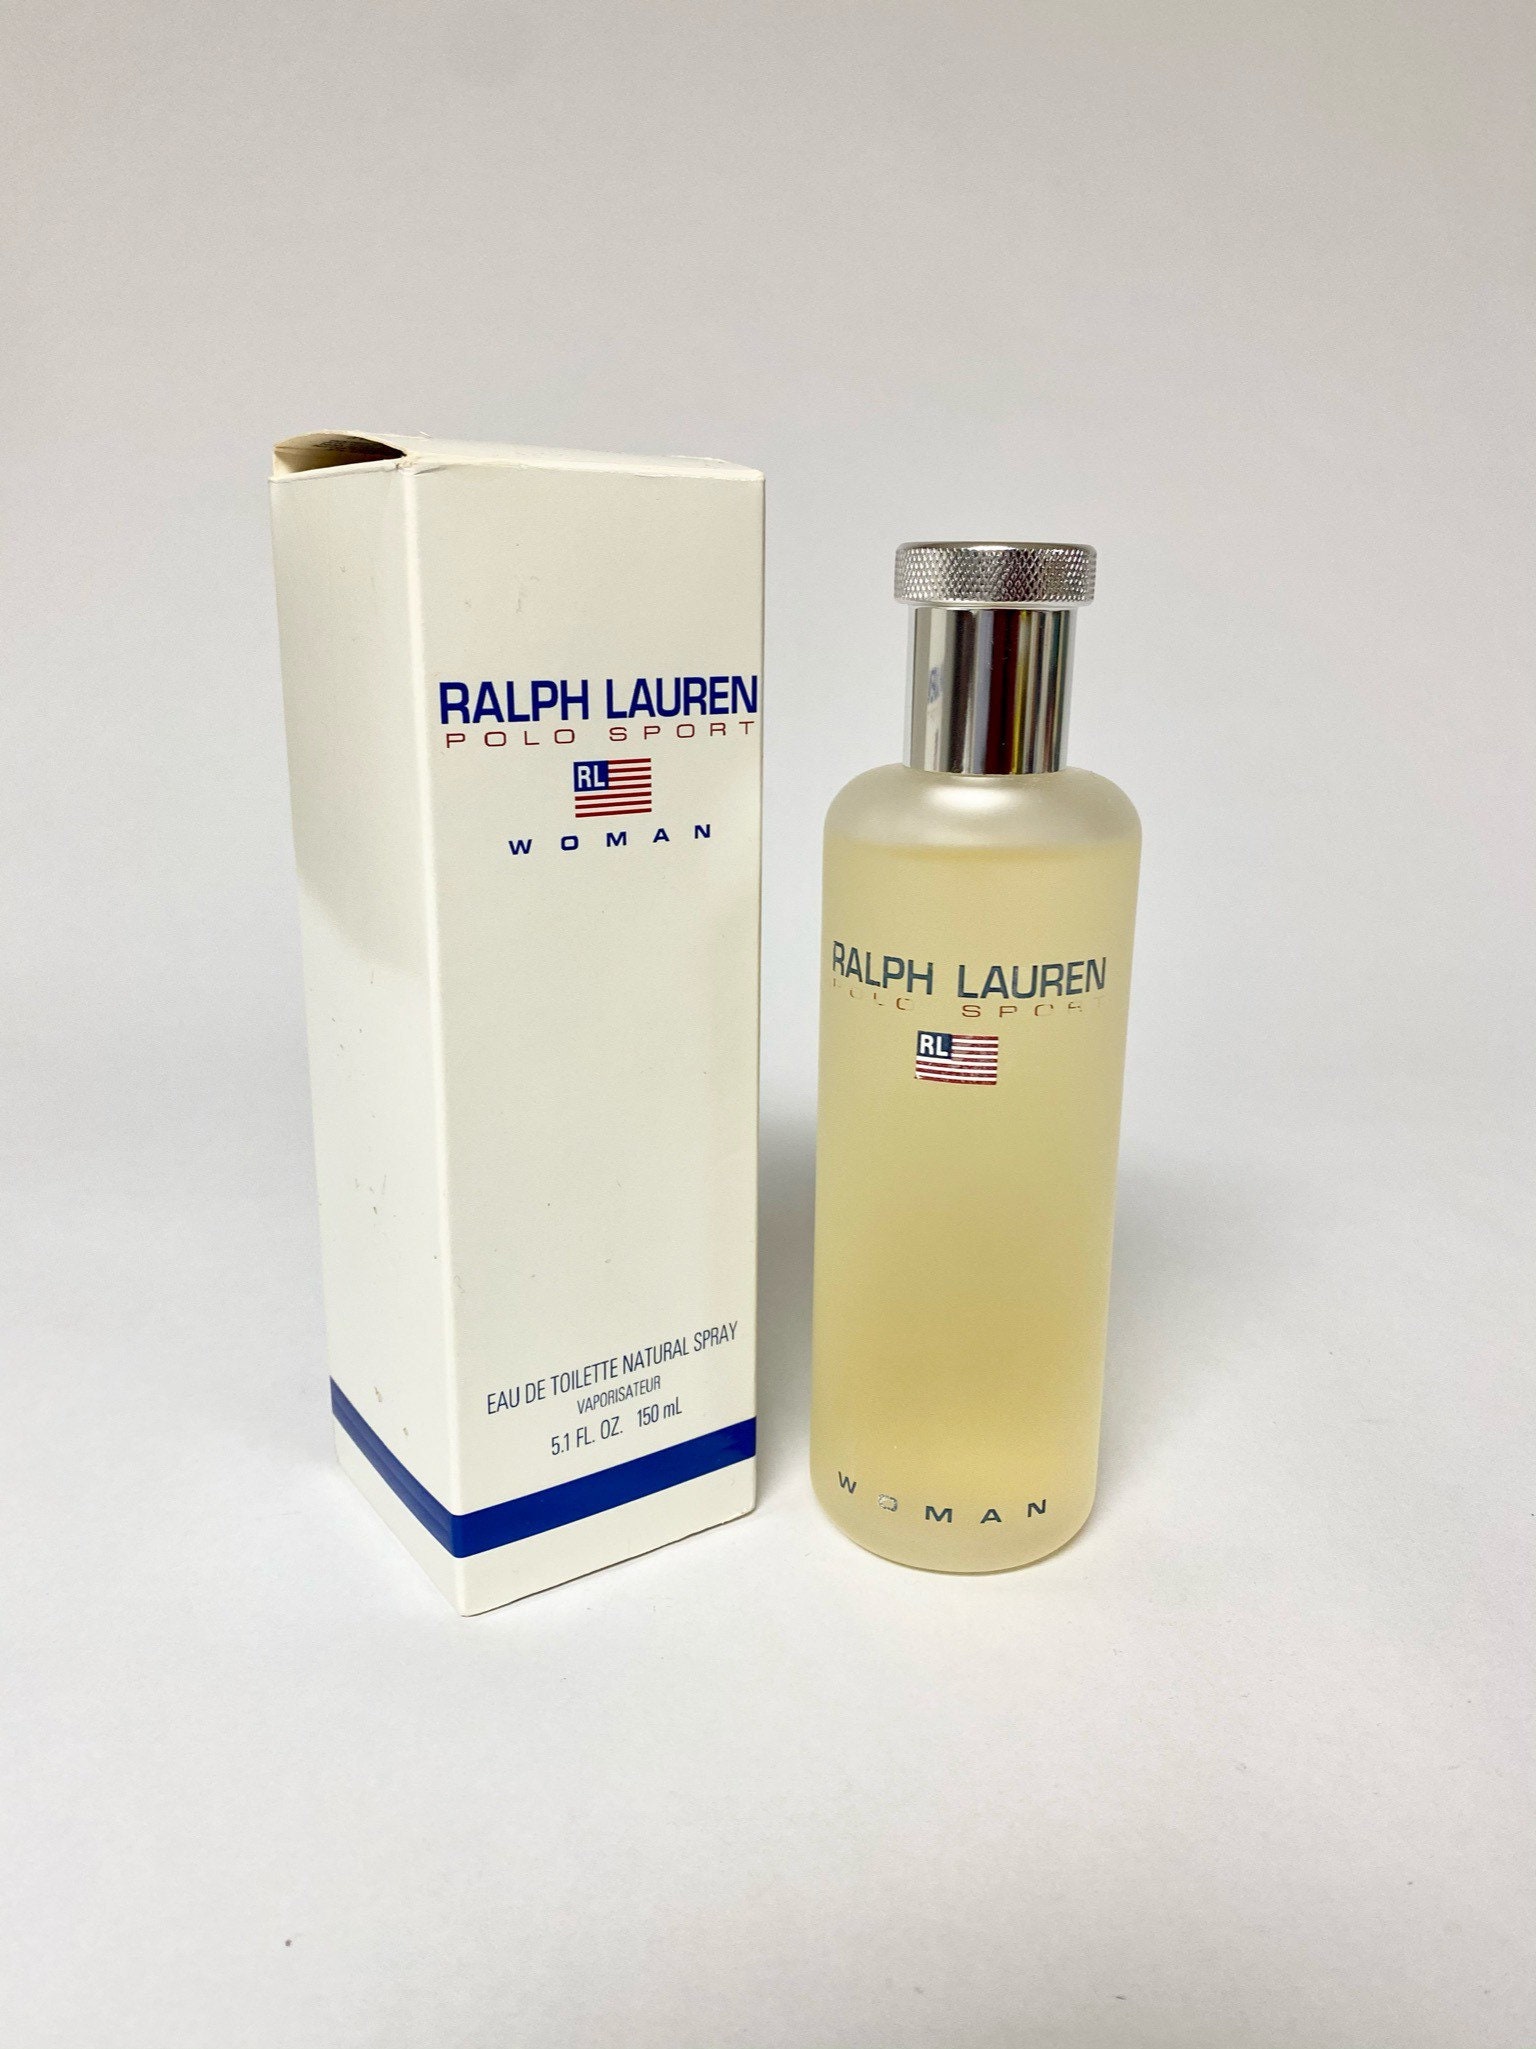 Polo Sport for Women by Ralph Lauren, Discontinued Vintage